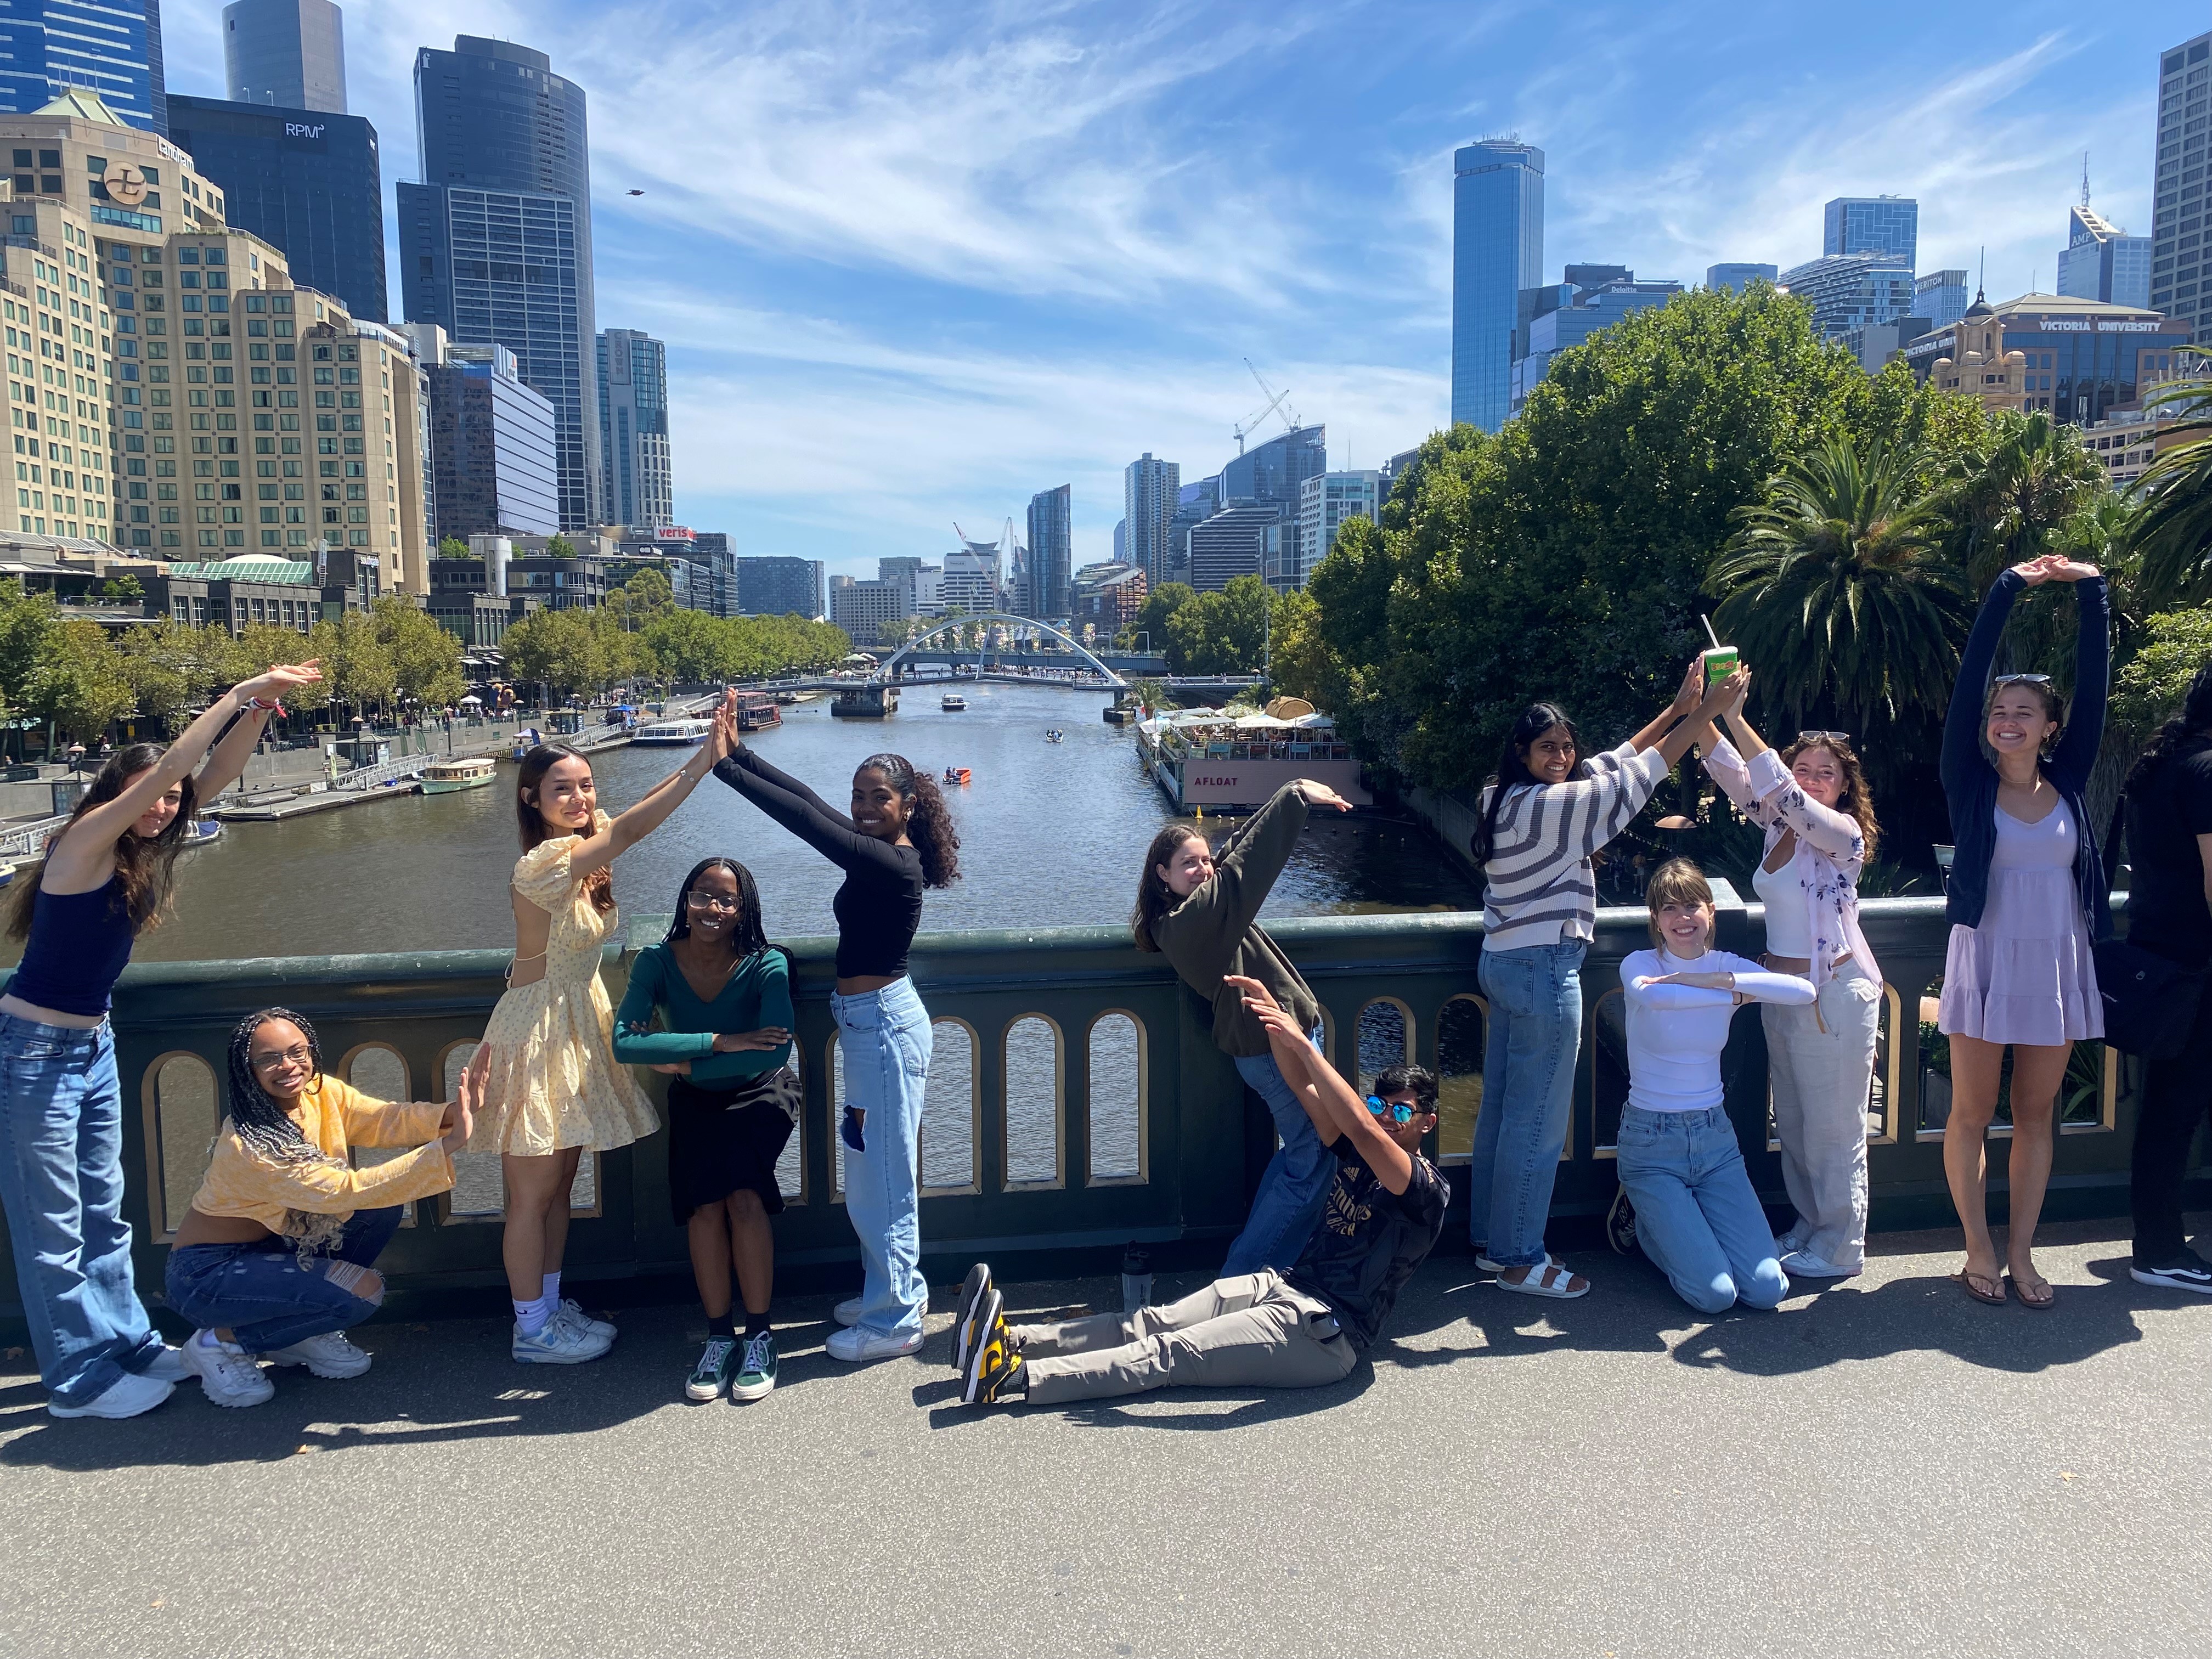 Students from American universities explore the city of Melbourne while completing their study abroad program through Consortium for Advanced Studies Abroad (CASA)  at the University of Melbourne